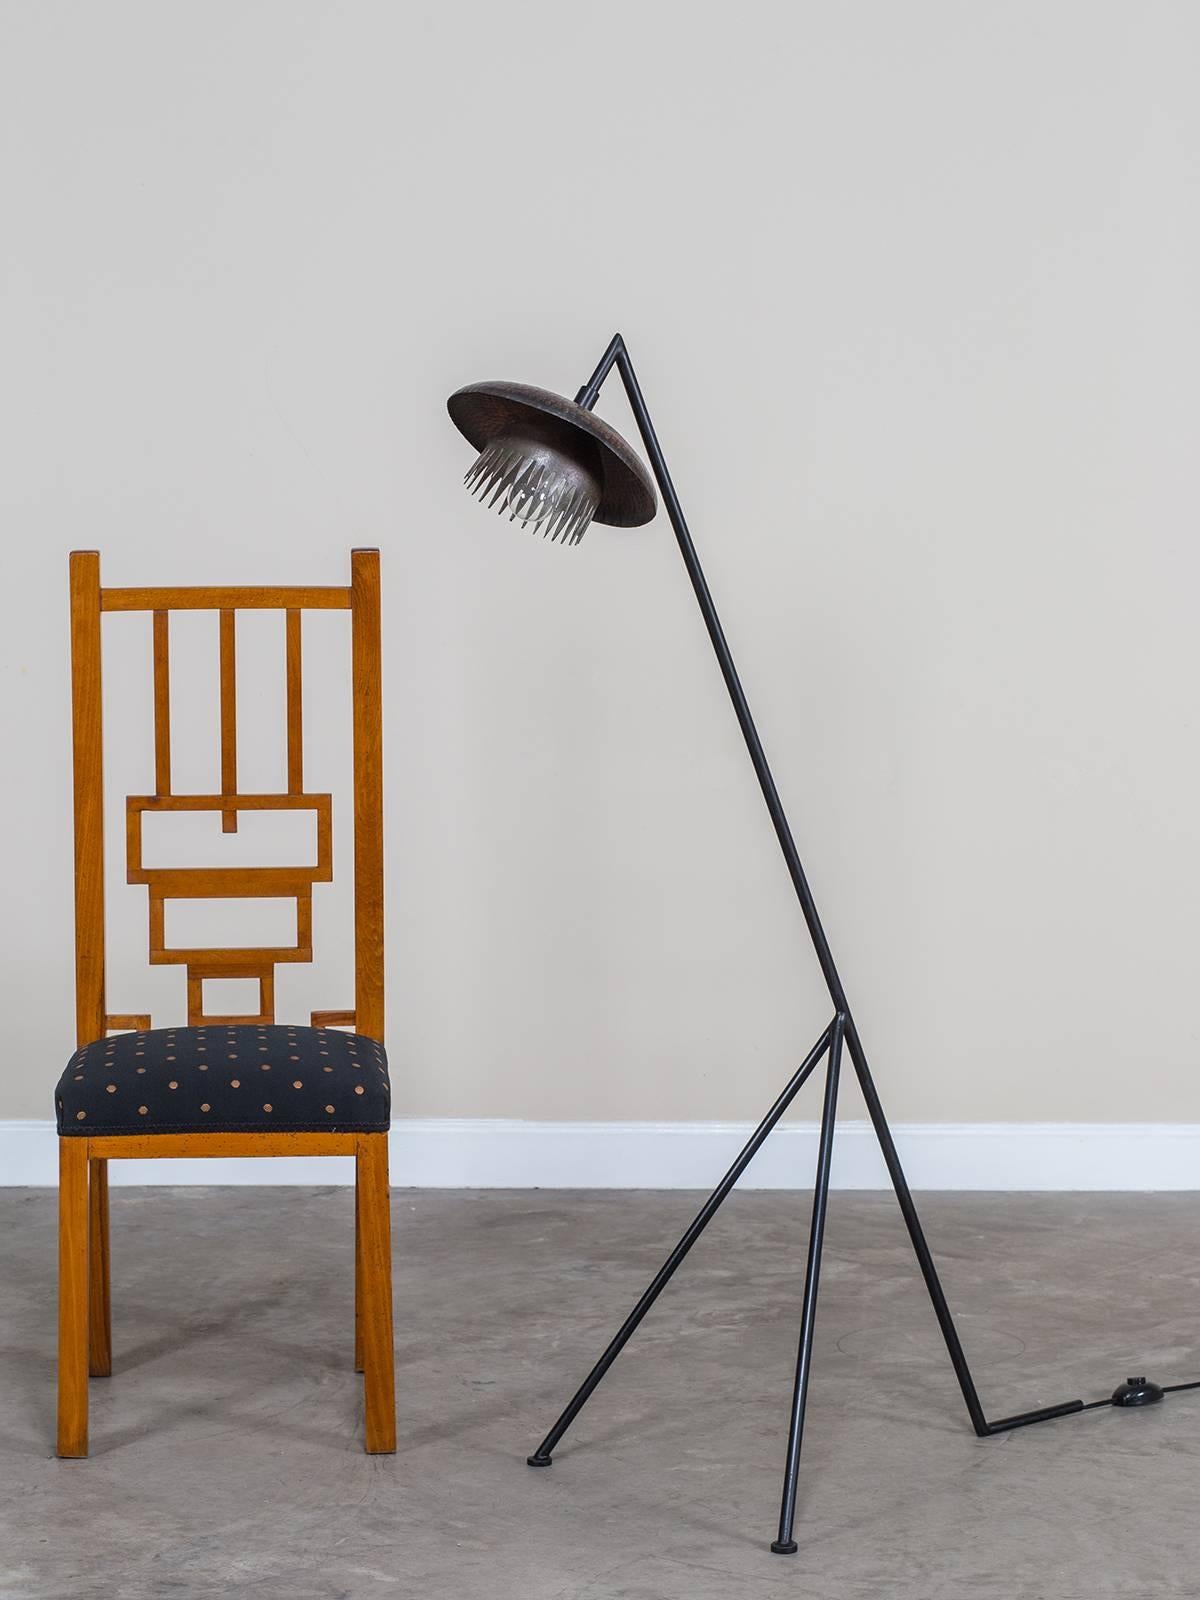 Receive our new selections direct from 1stdibs by email each week. Please click Follow Dealer below and see them first!

The angular simplicity of this vintage floor lamp circa 1960 with its tubular supports is set off by the circular head of